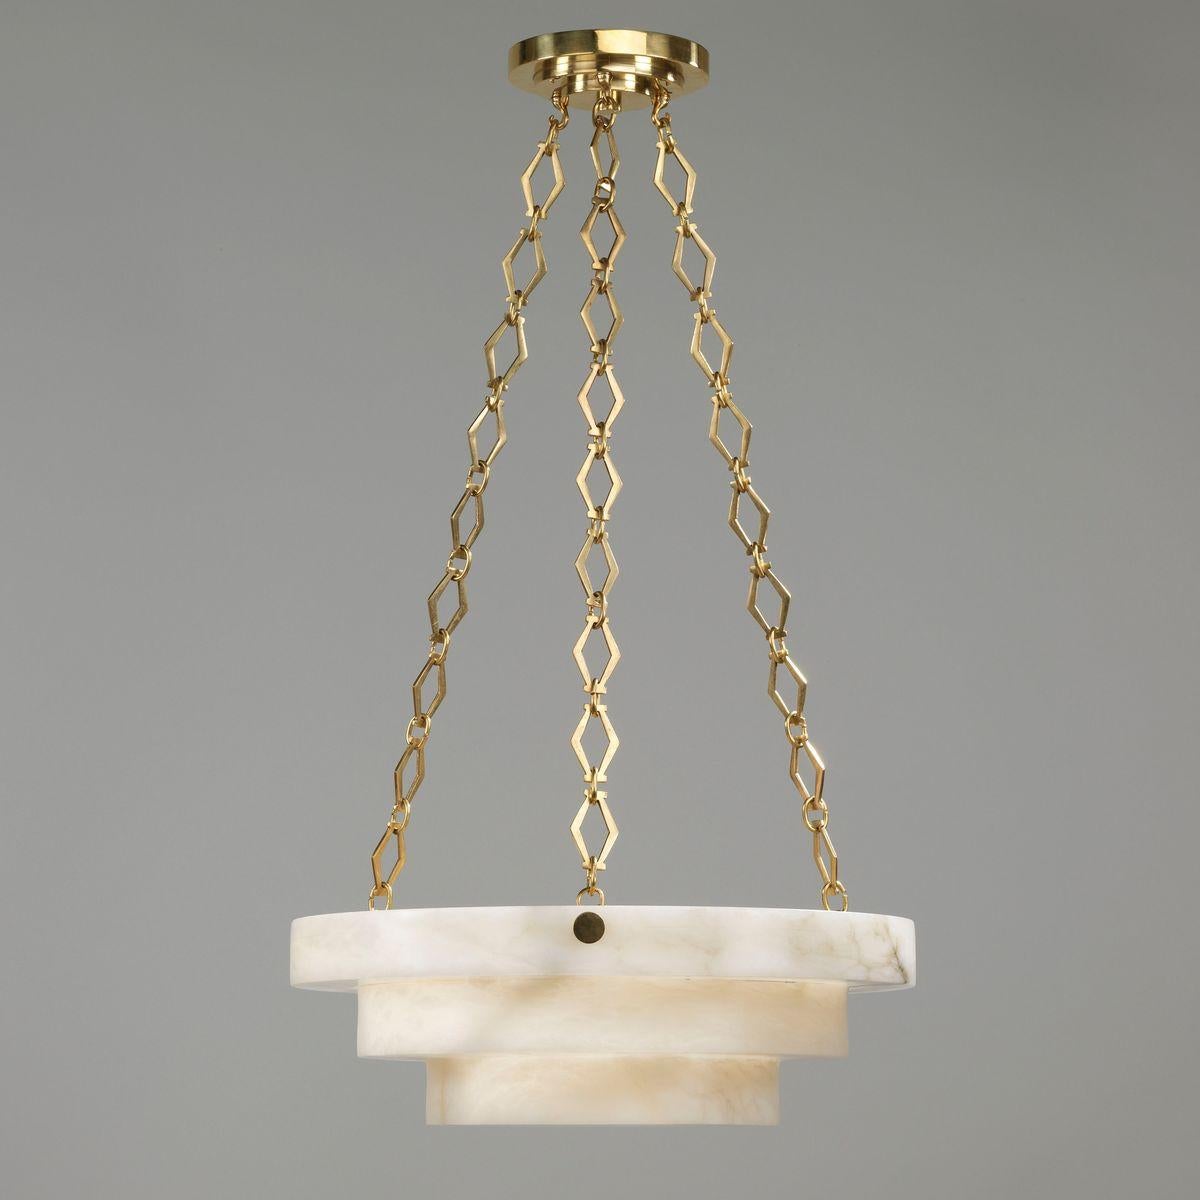 Understated in style, with a fine hand-finished Italian alabaster bowl suspended from nickel-plated diamond-shaped chains. All components are produced from solid cast brass, for the highest standard of quality and durability. This light is